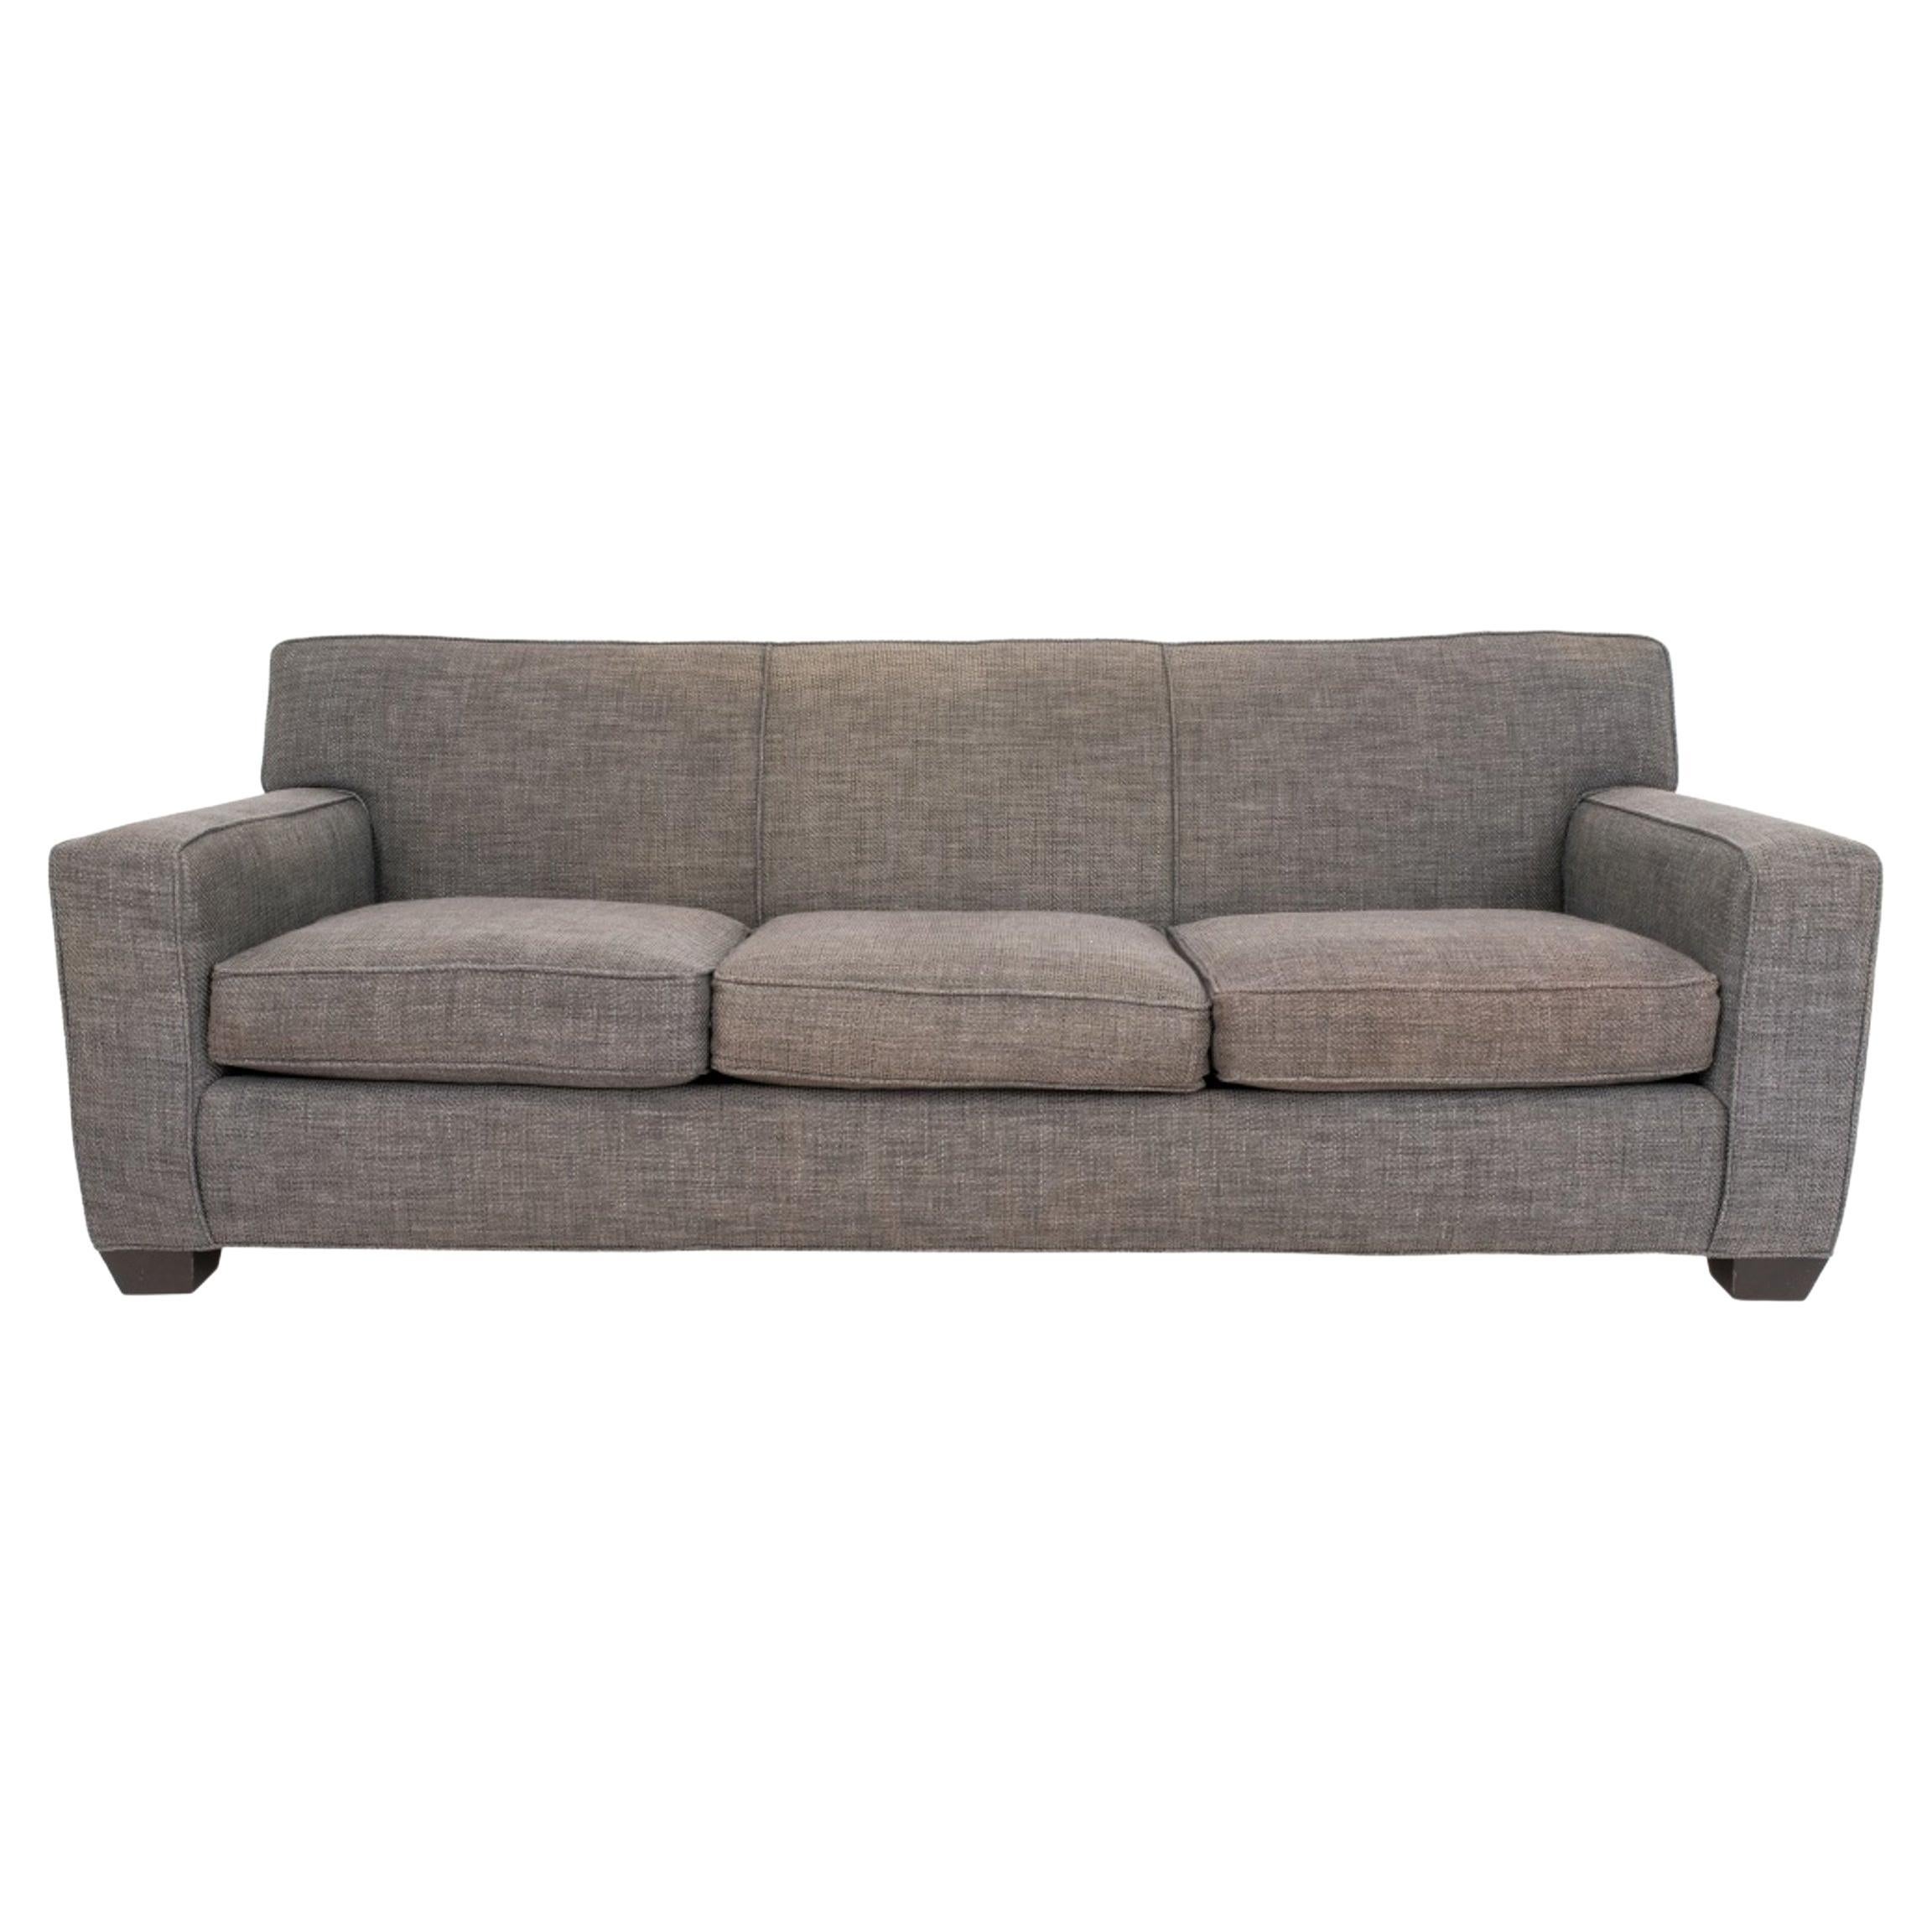 Chenille Upholstered Three Seater Sofa